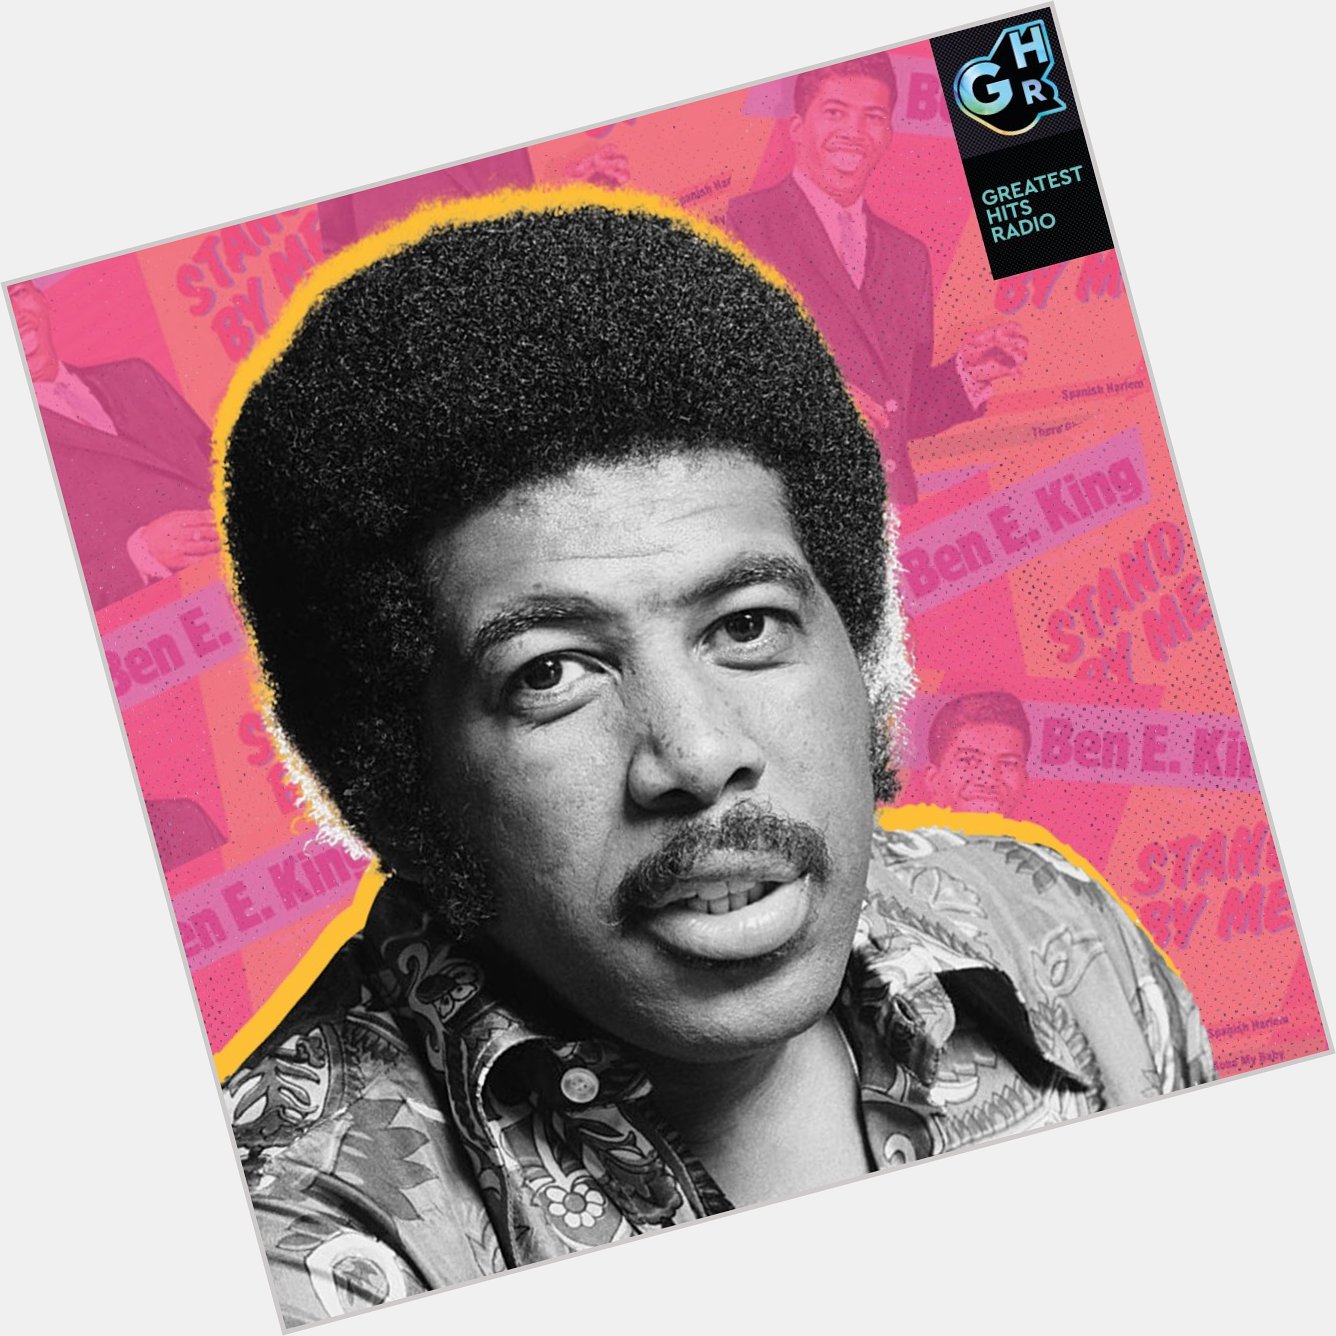 A heavenly Happy birthday to Ben E. King What song of his did you love the most? 